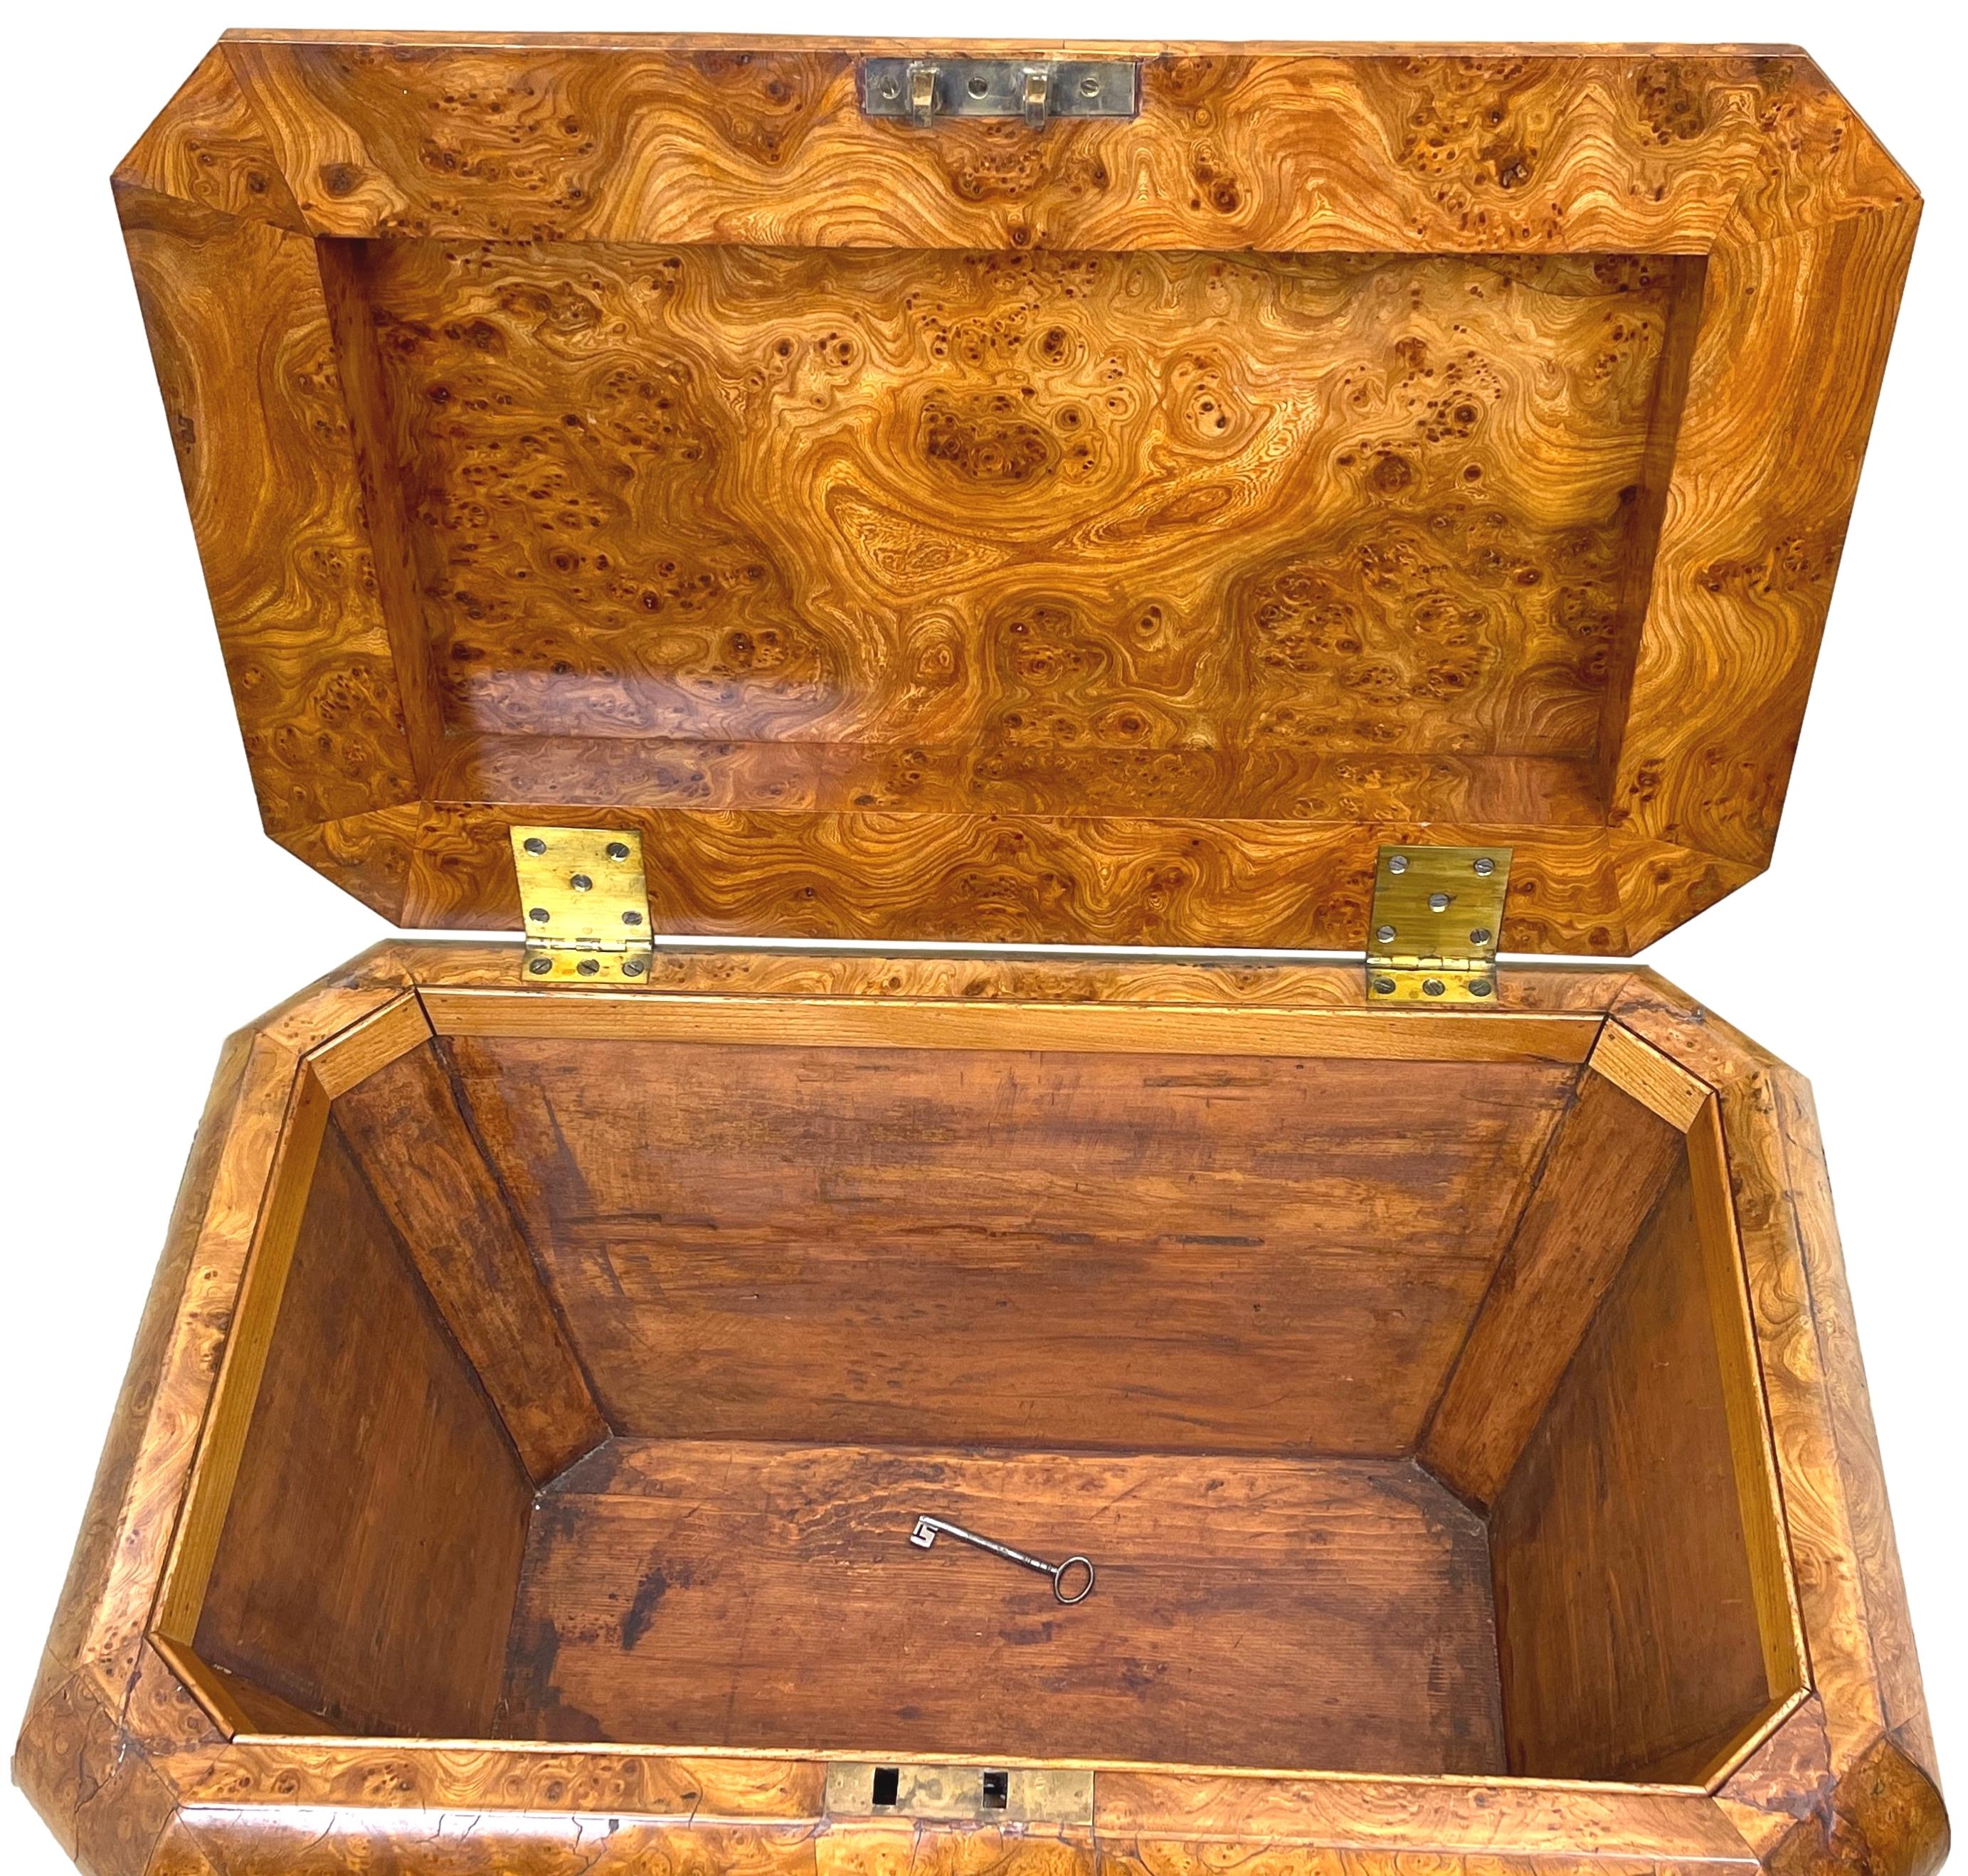 An Exceptionally Rare Regency Period Burr Elm Cellarette, Or Wine Cooler, Of Sarcophagus Form Having Lift Up Lid With Original Brass Hinges And Rich Foliate Carved Decoration Standing On Original Tablet Feet.

Cellarettes, often referred to as